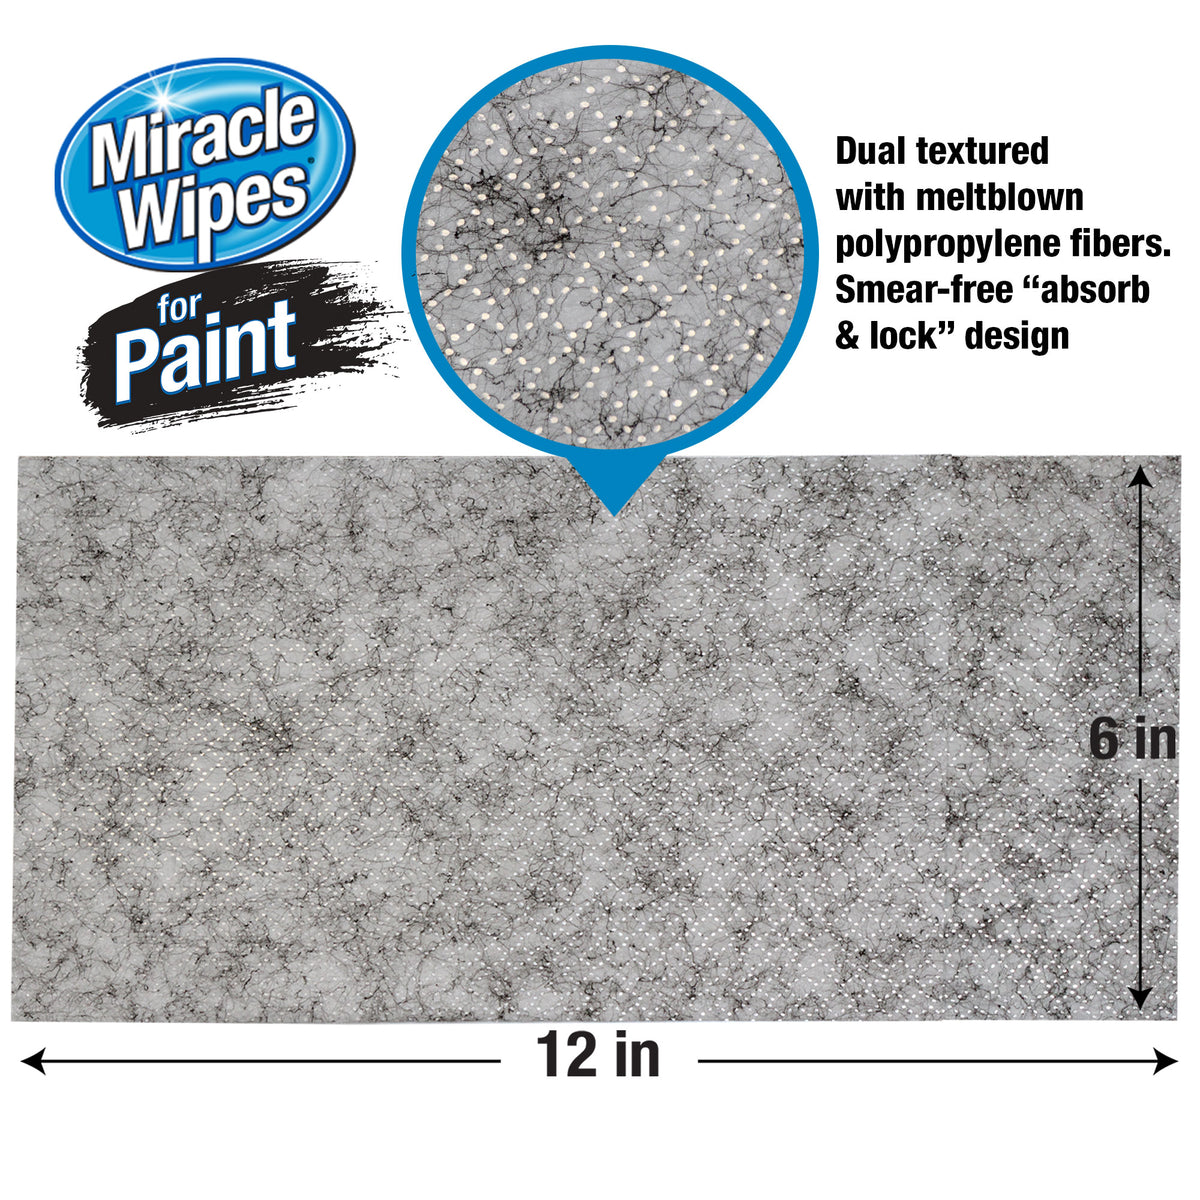 Miraclewipes for Stainless Steel (60 Count)